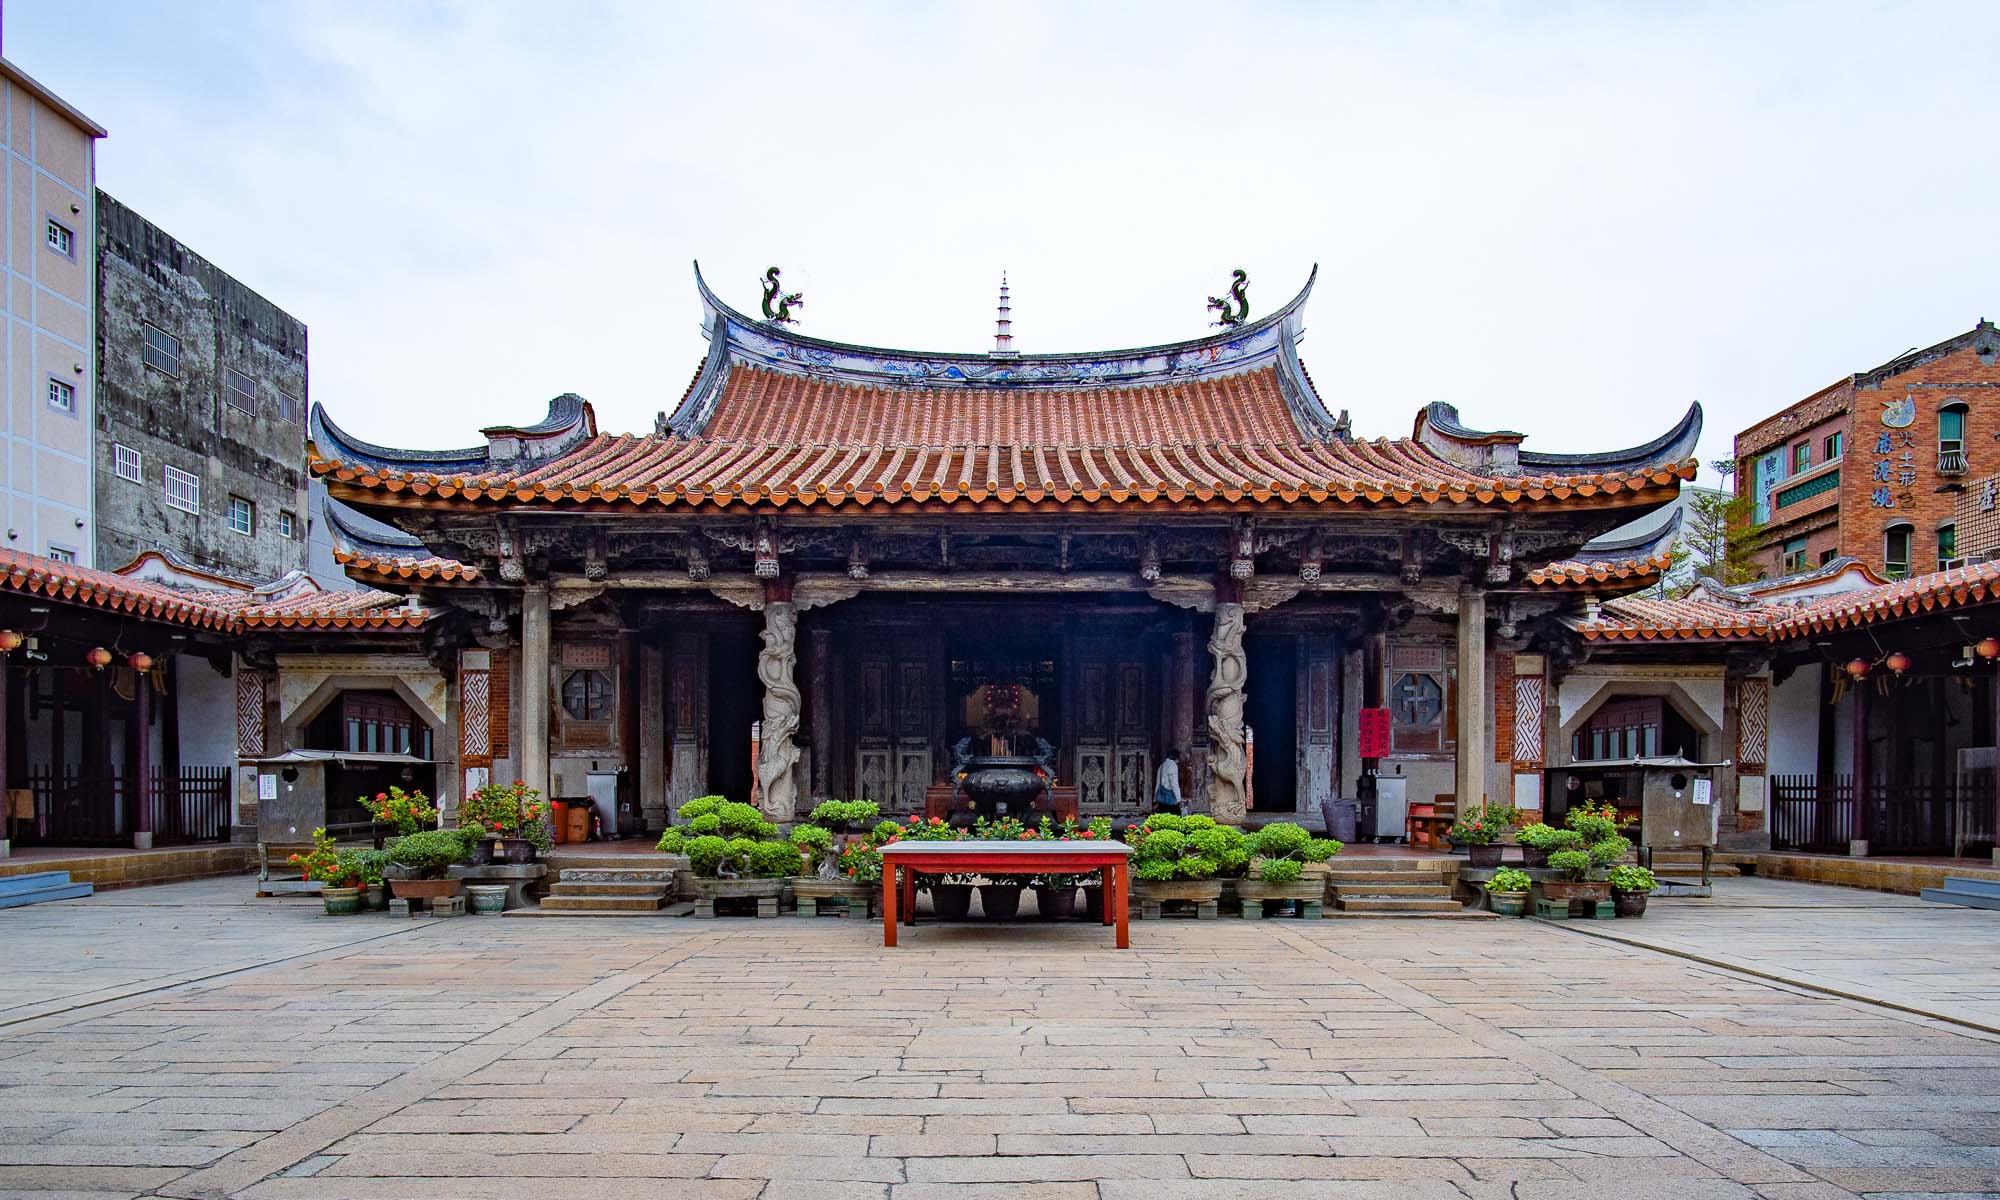 The facade of Lukang Longshan Temple, the most well-preserved historic site in Taiwan.